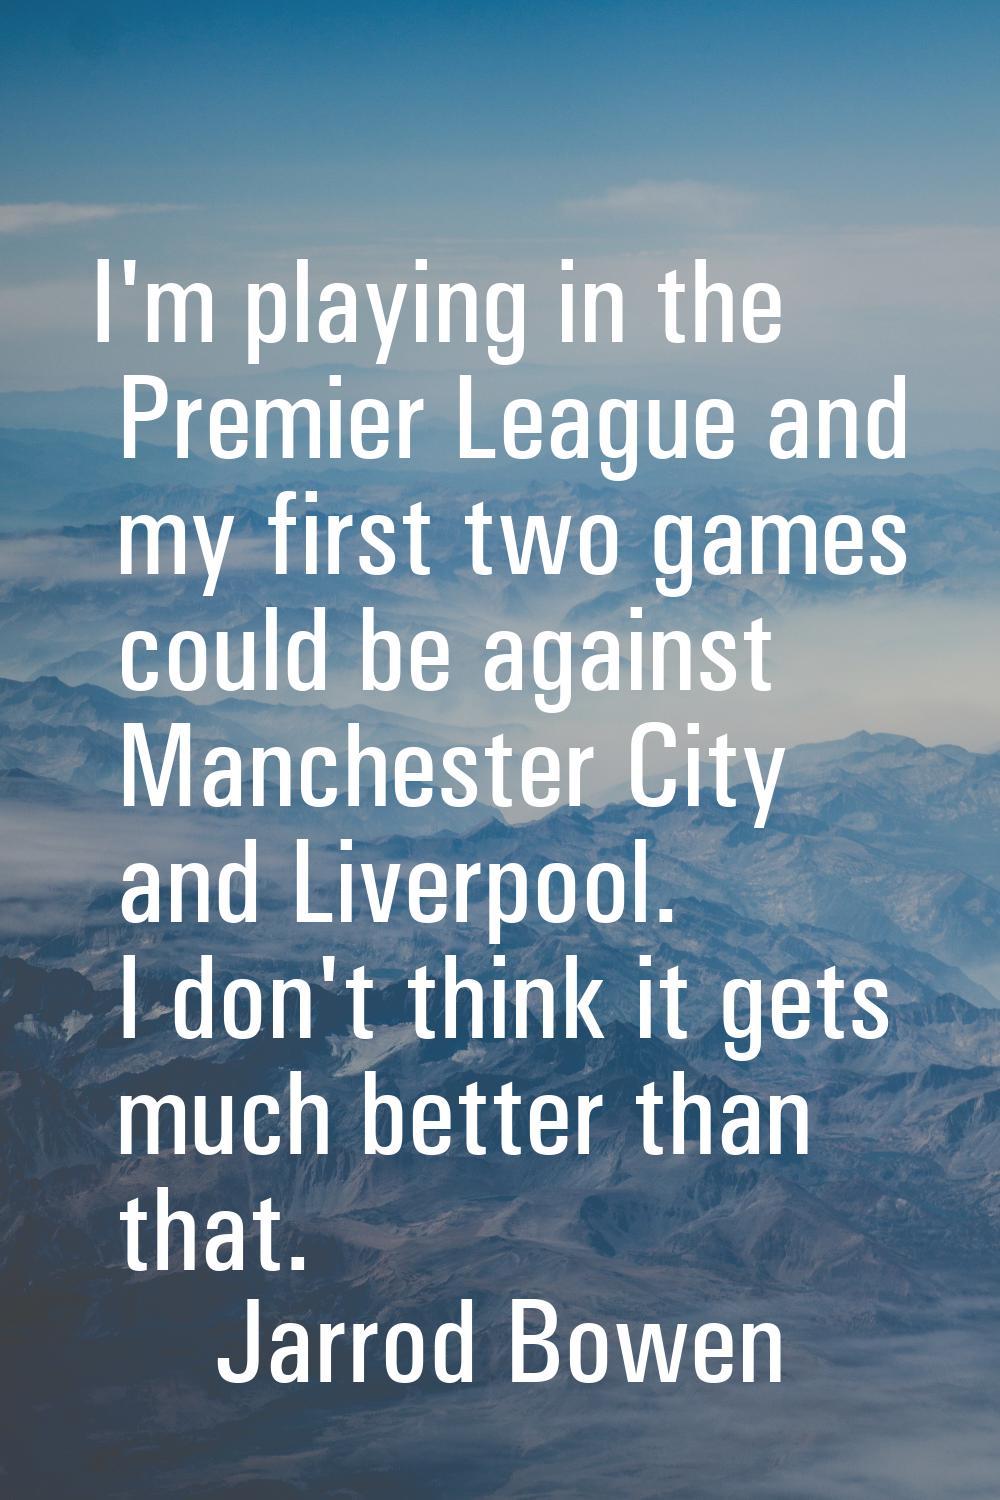 I'm playing in the Premier League and my first two games could be against Manchester City and Liver